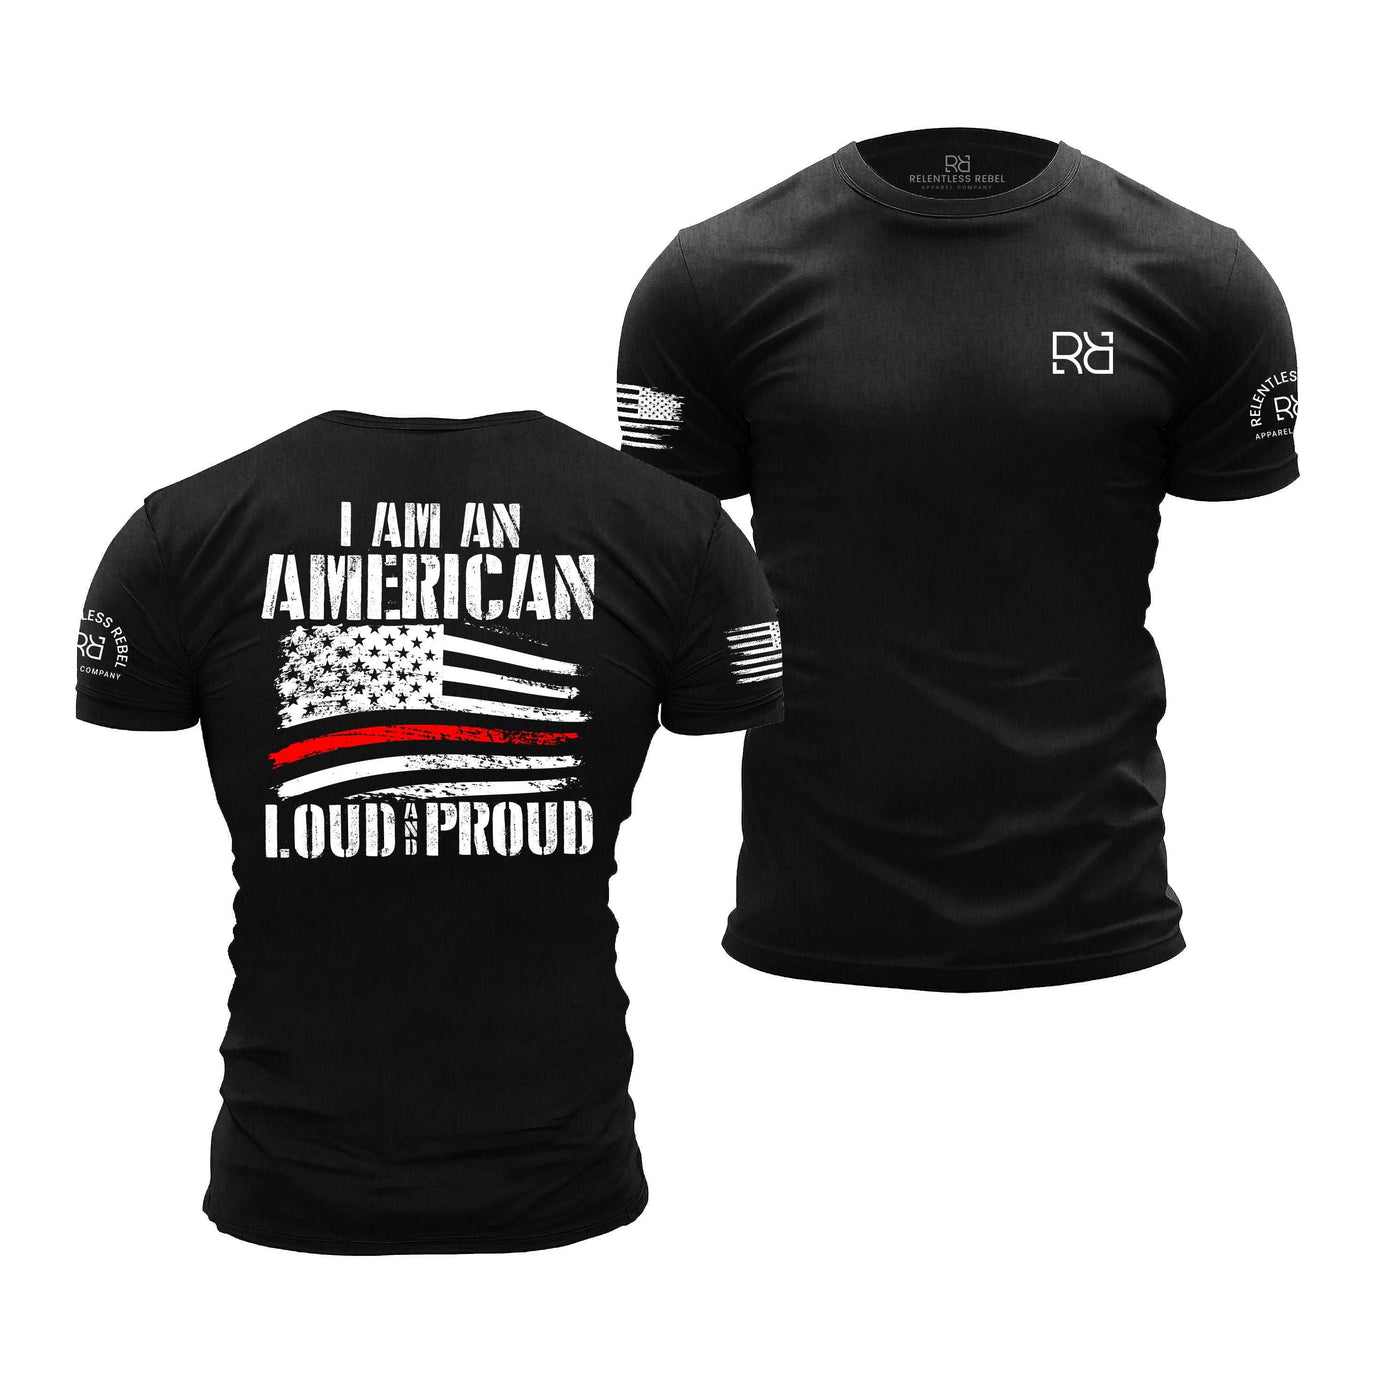 Solid Black Men's I Am An American Loud and Proud Back Design Tee